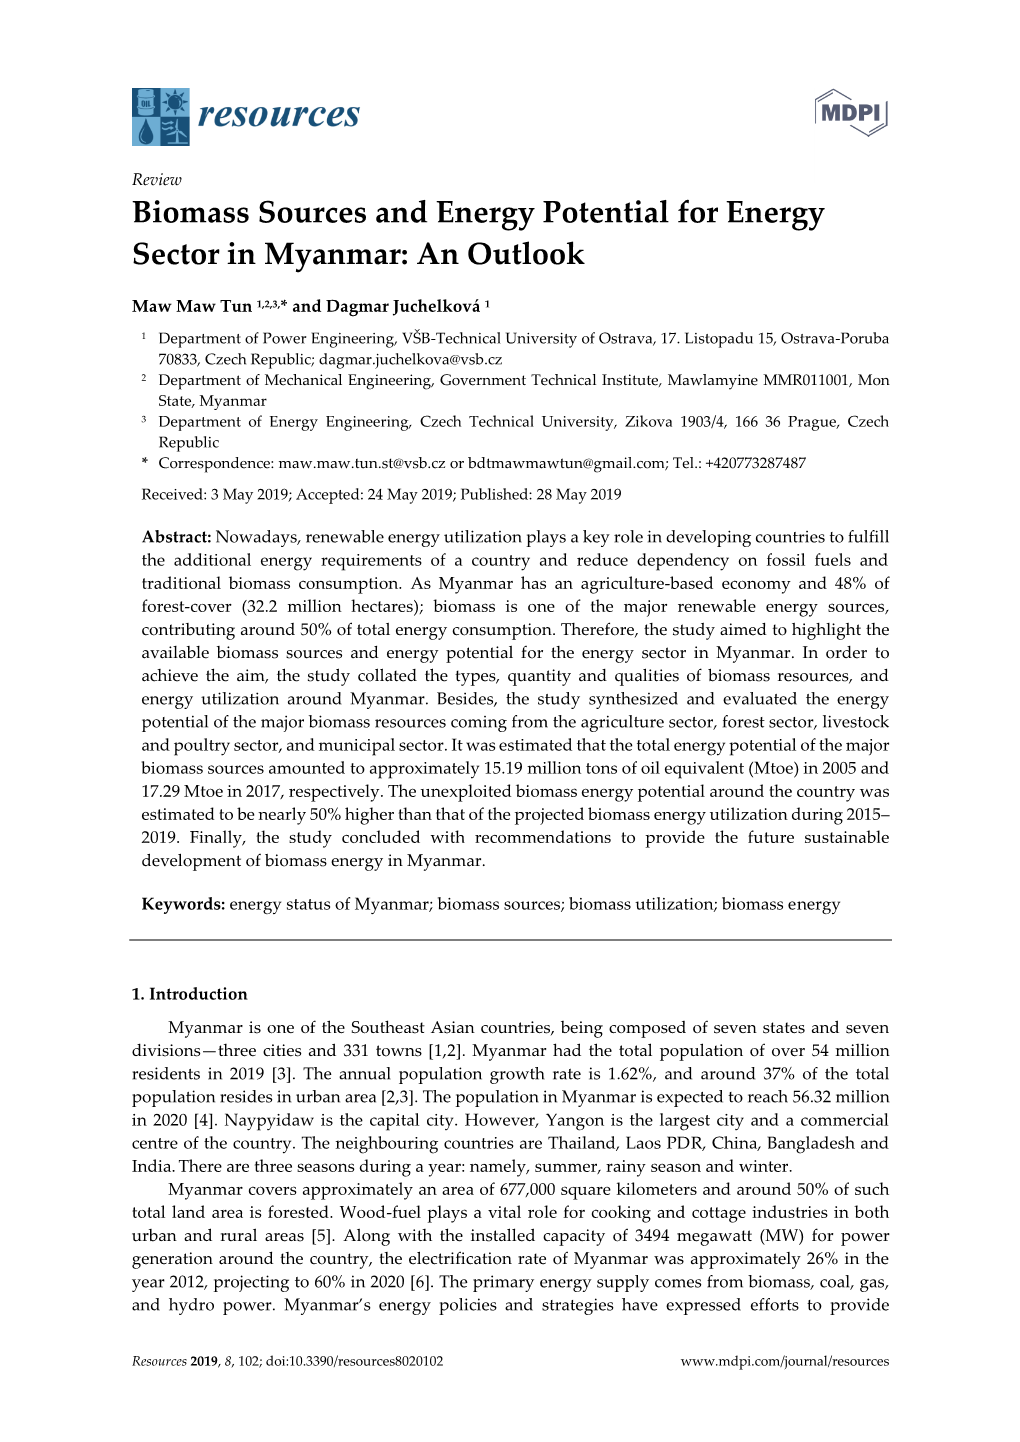 Biomass Sources and Energy Potential for Energy Sector in Myanmar: an Outlook